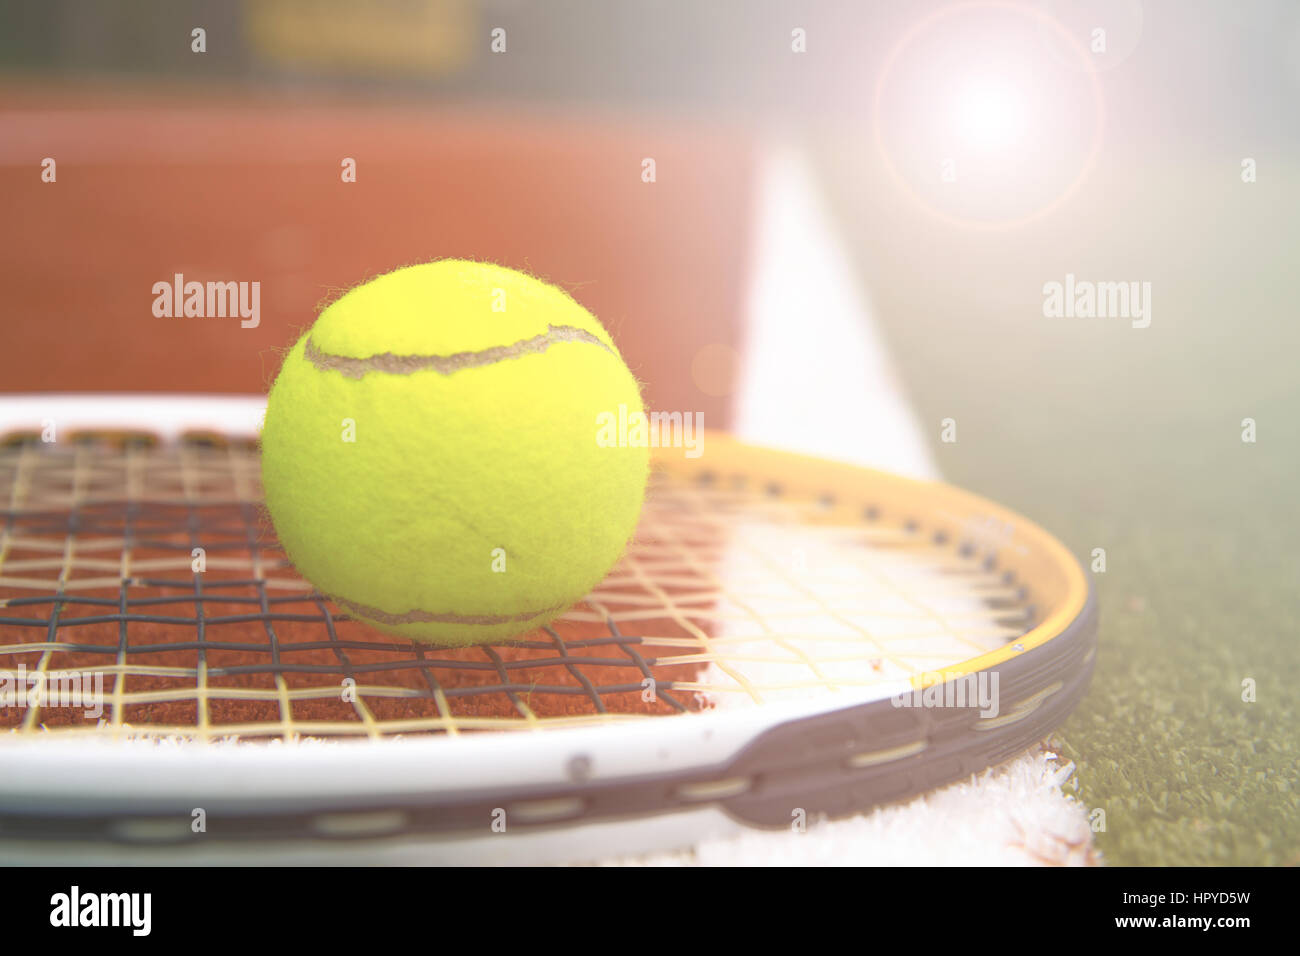 tennis ball and tennis racket on a tennis court with blurred background Stock Photo